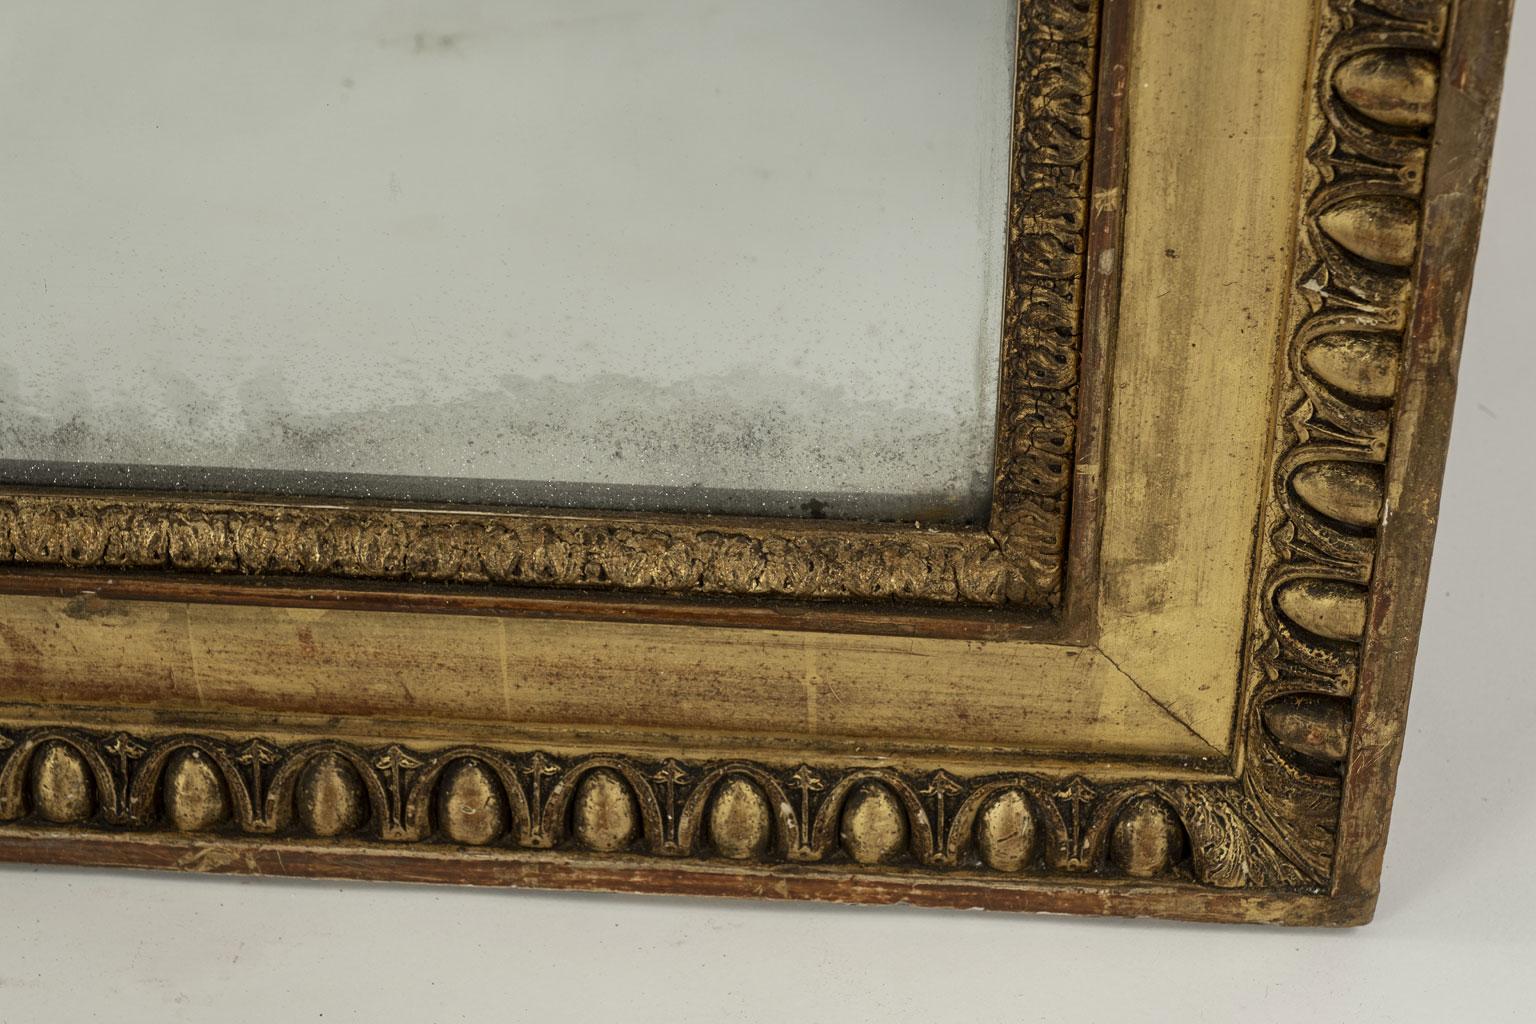 Large 19th century French giltwood mirror with egg and dart decoration. Original - or early - mercury mirror plate with small losses of silvering on reverse. Small amounts of subtle diamond dust effect around edges.